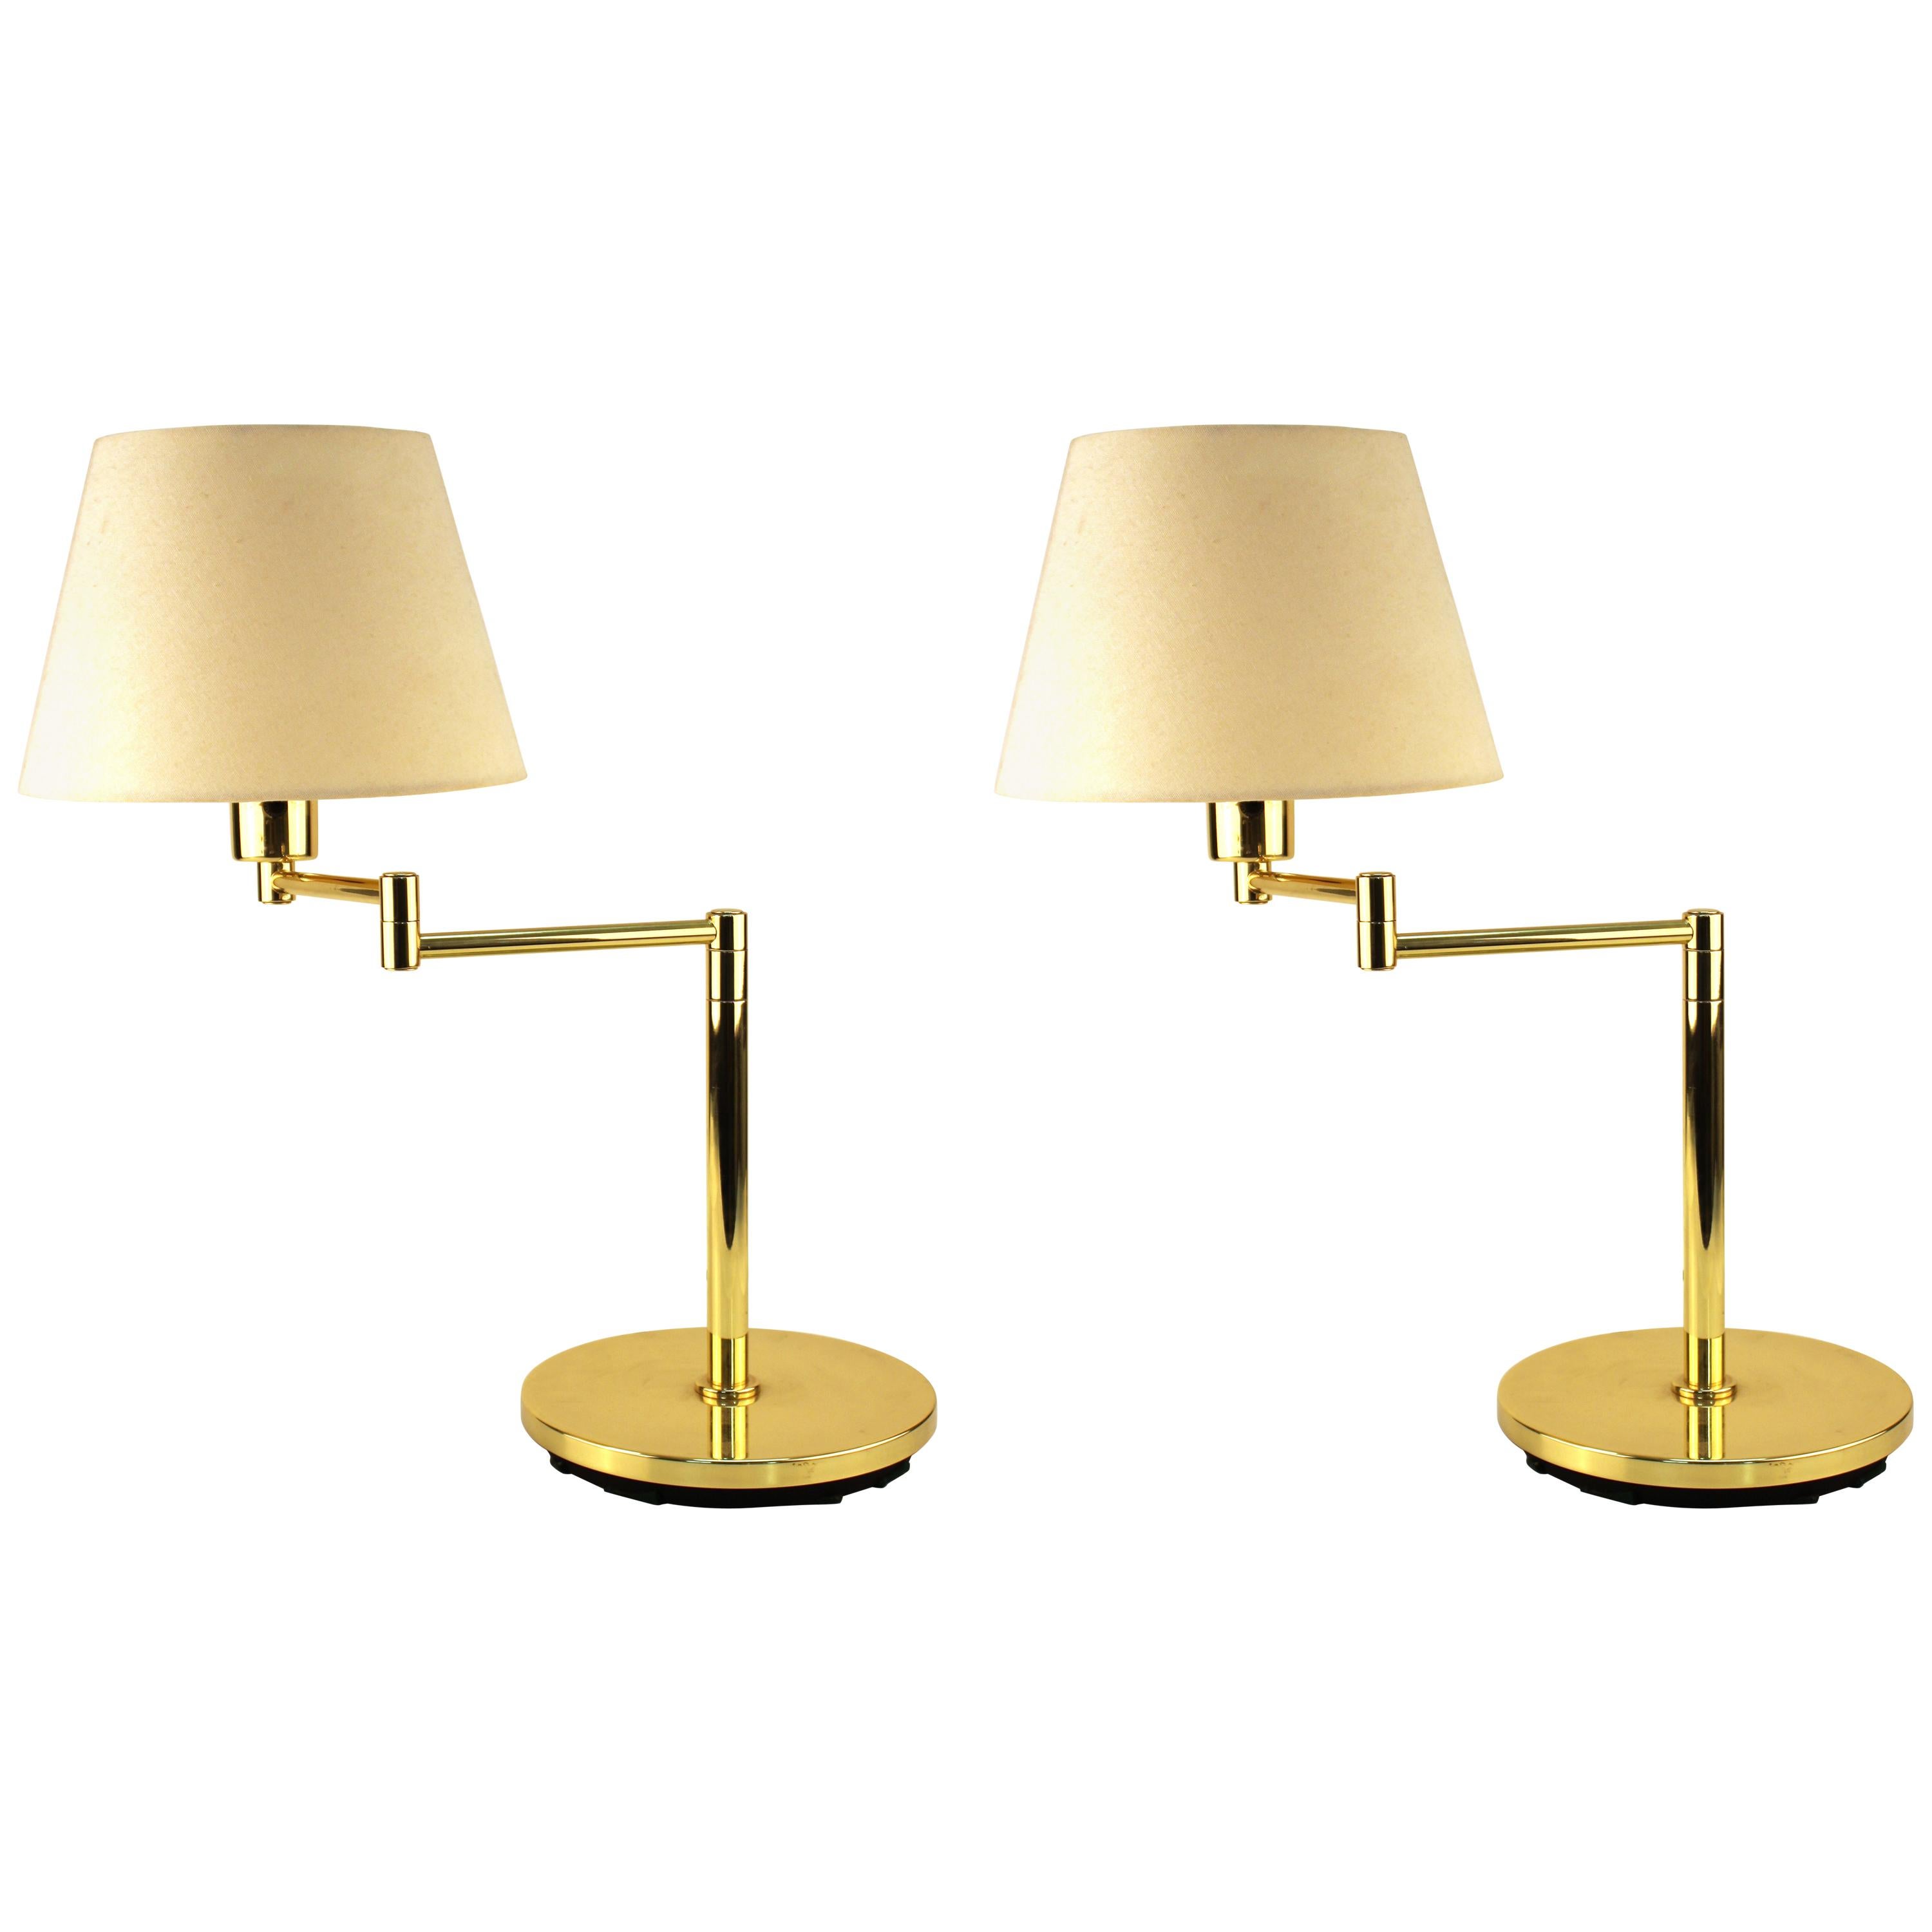 Hinsen Mid-Century Modern Style Table Lamps With Extendable Arms